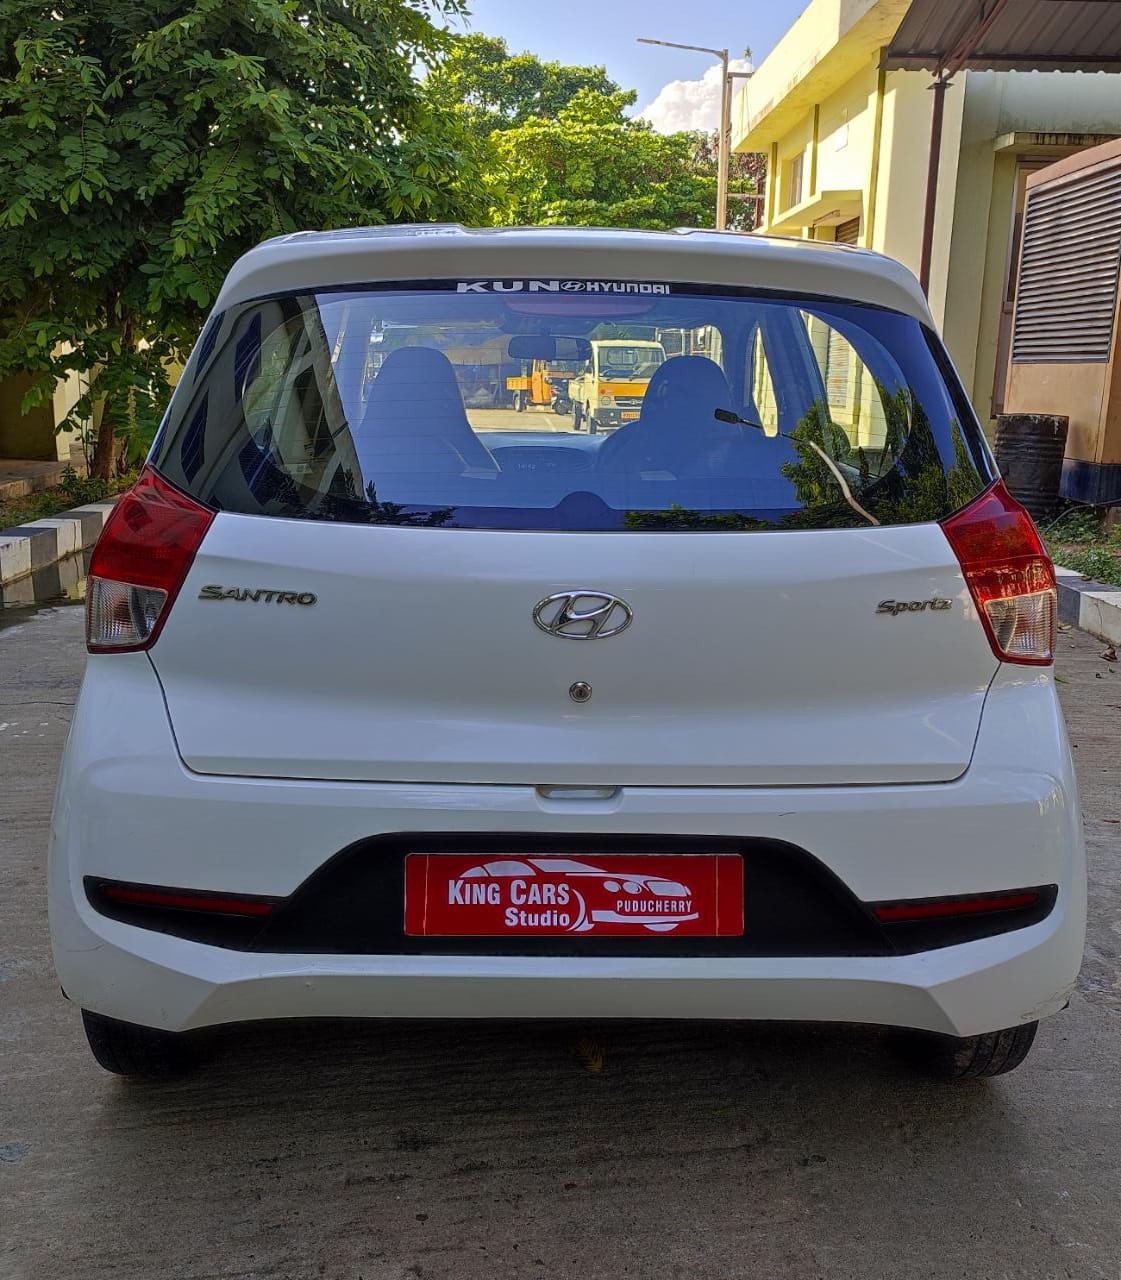 5316-for-sale-Hyundai-Santro-Petrol-First-Owner-2018-PY-registered-rs-479999